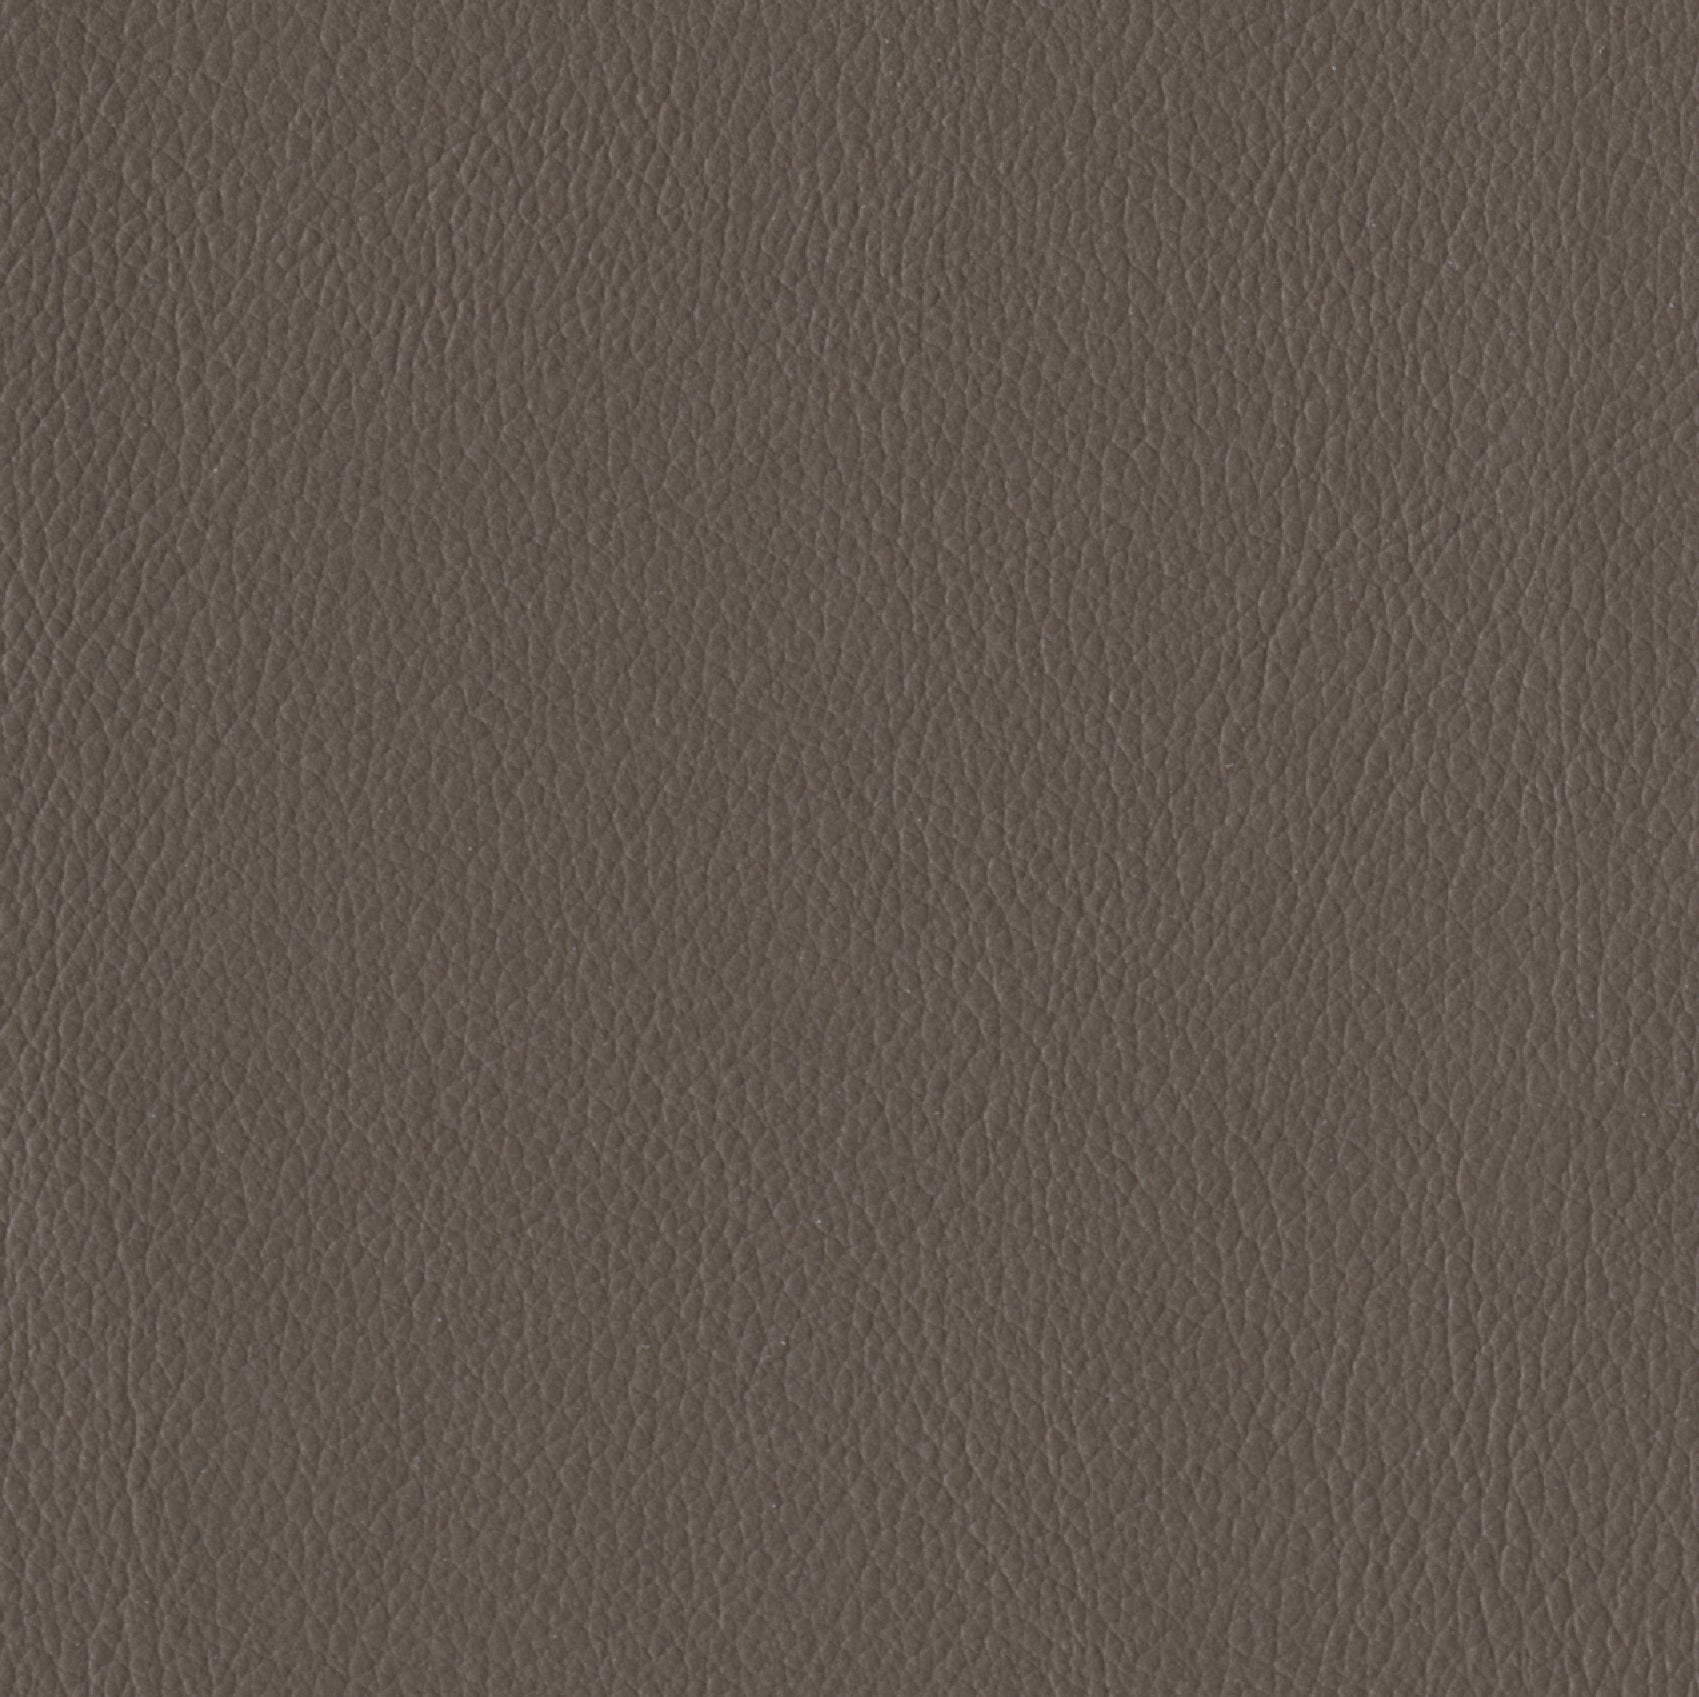     Andriali-Contract-Vinyl_Upholstery-Design-SultanFR-5-Color-060FRGrey-Width-140cm